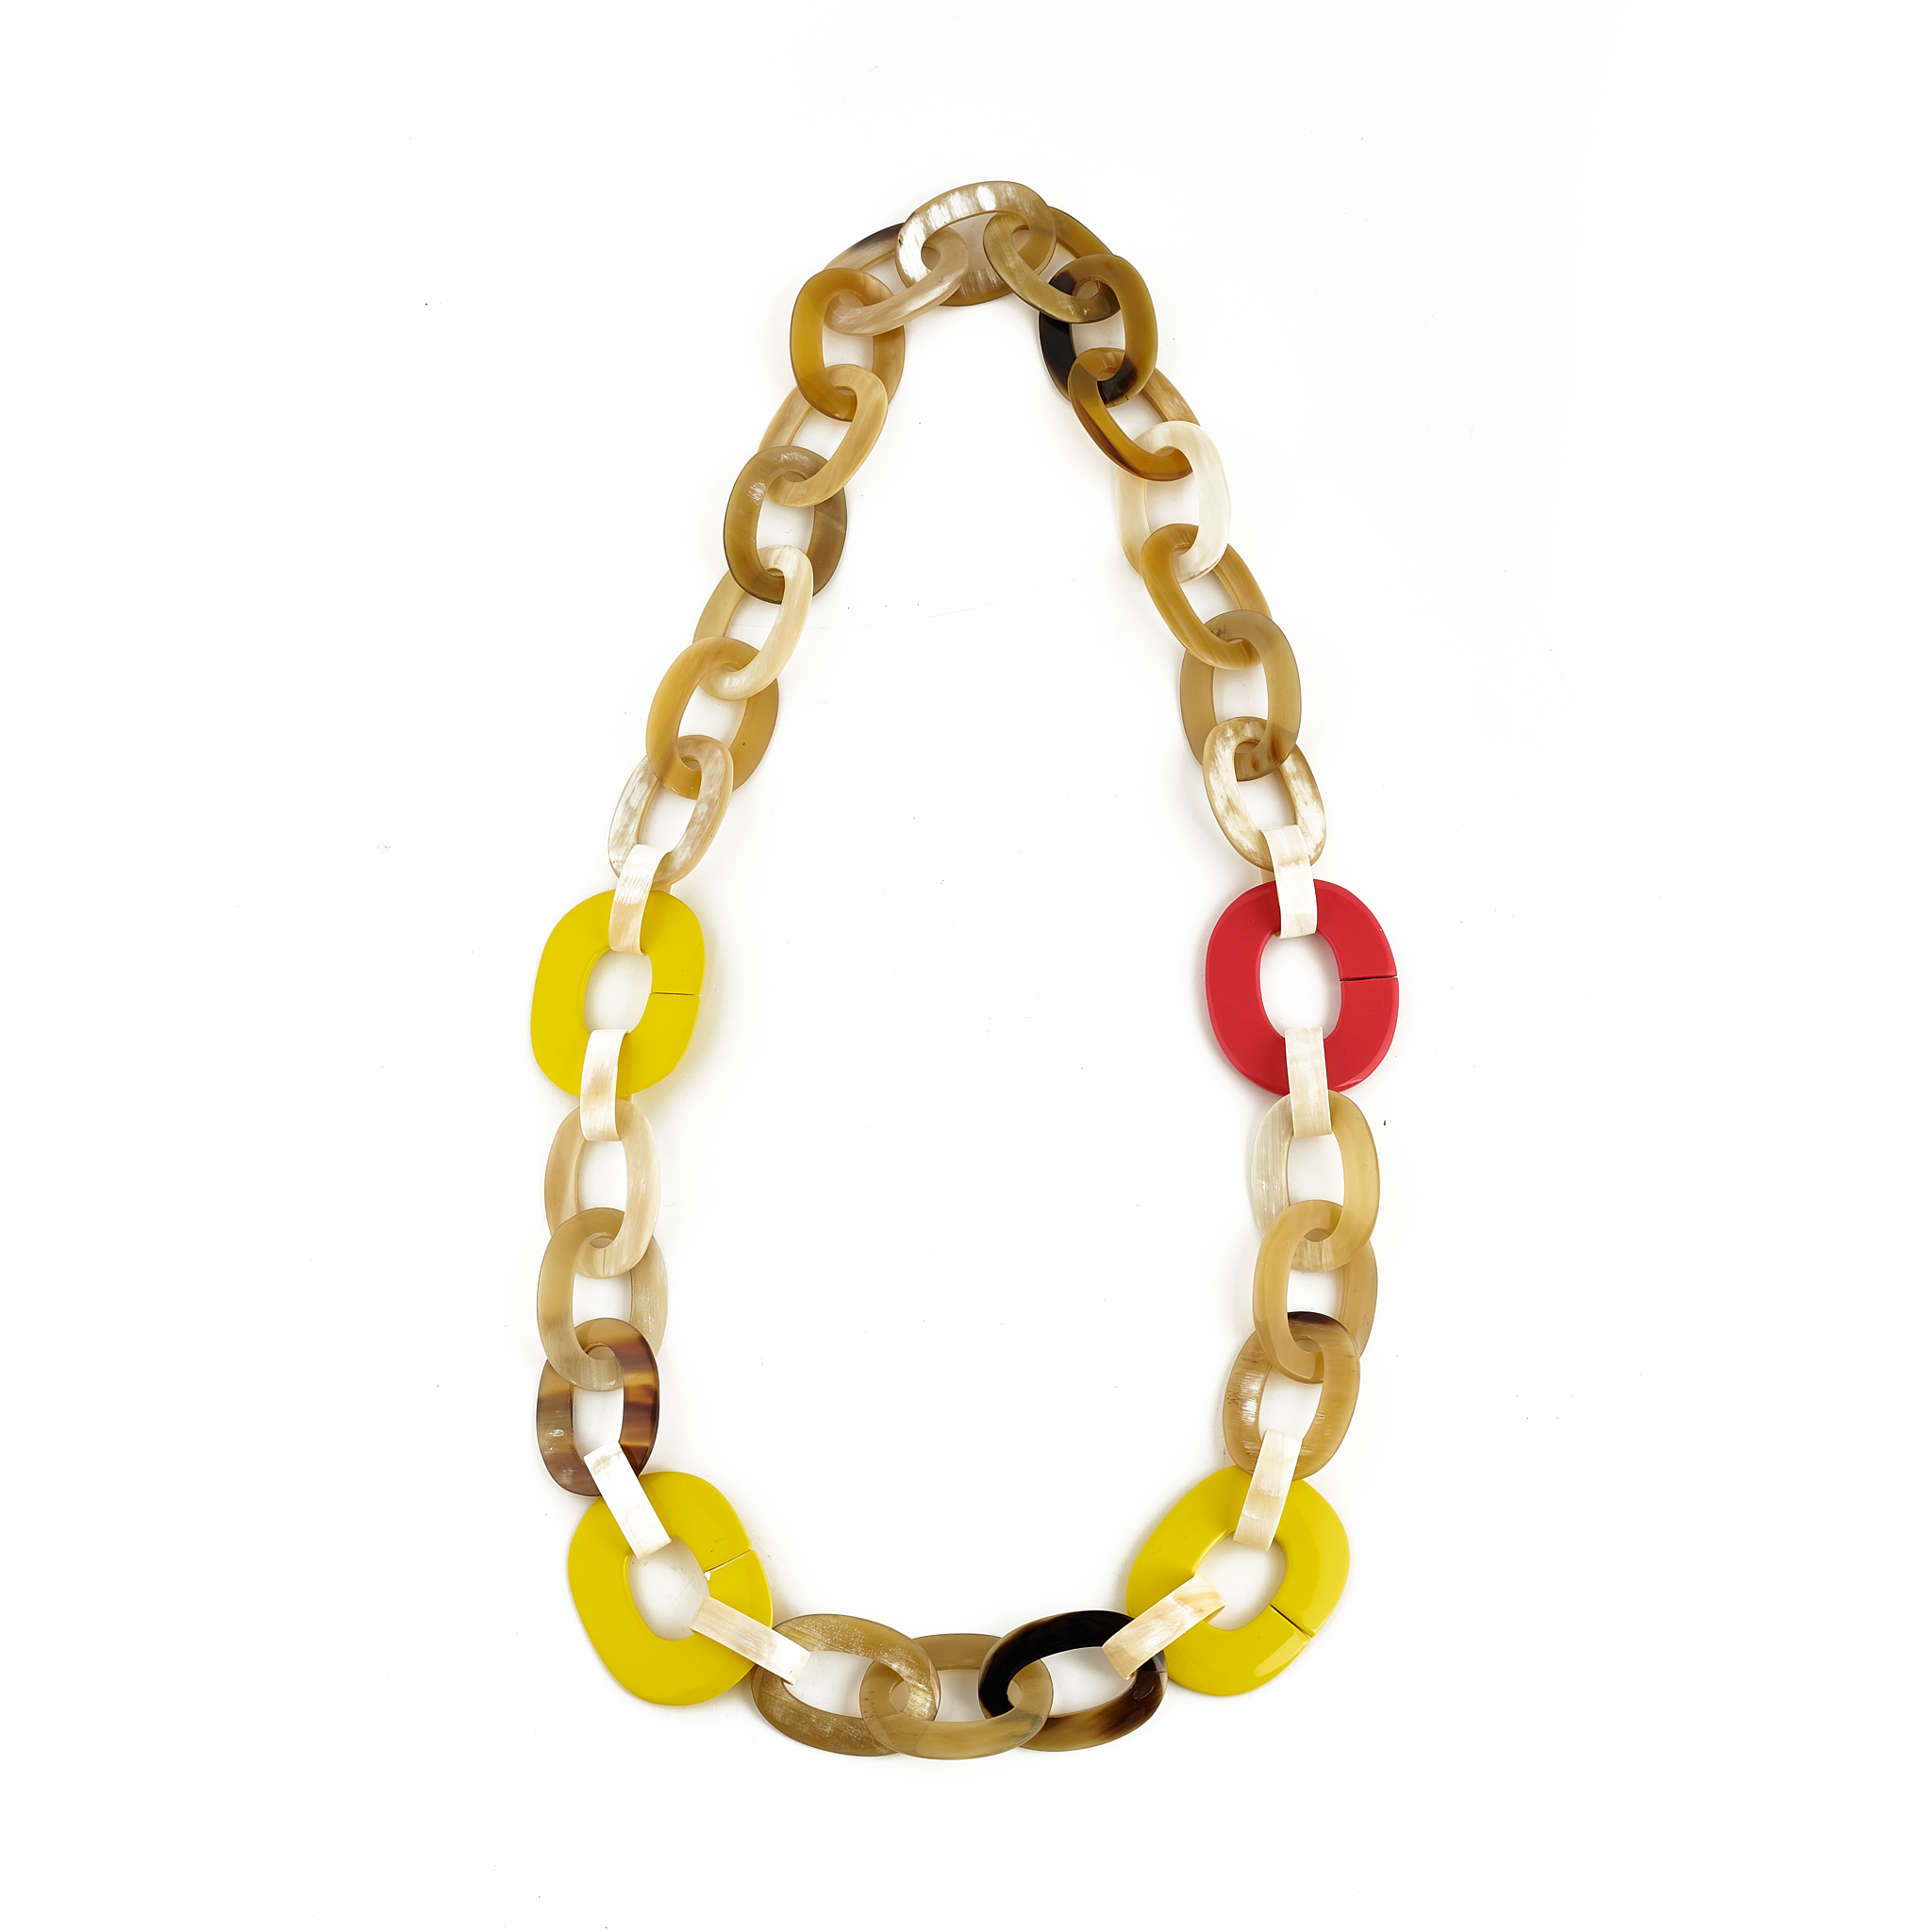 Horn & Lacquer Chain Necklace #14240 - HORN JEWELRY